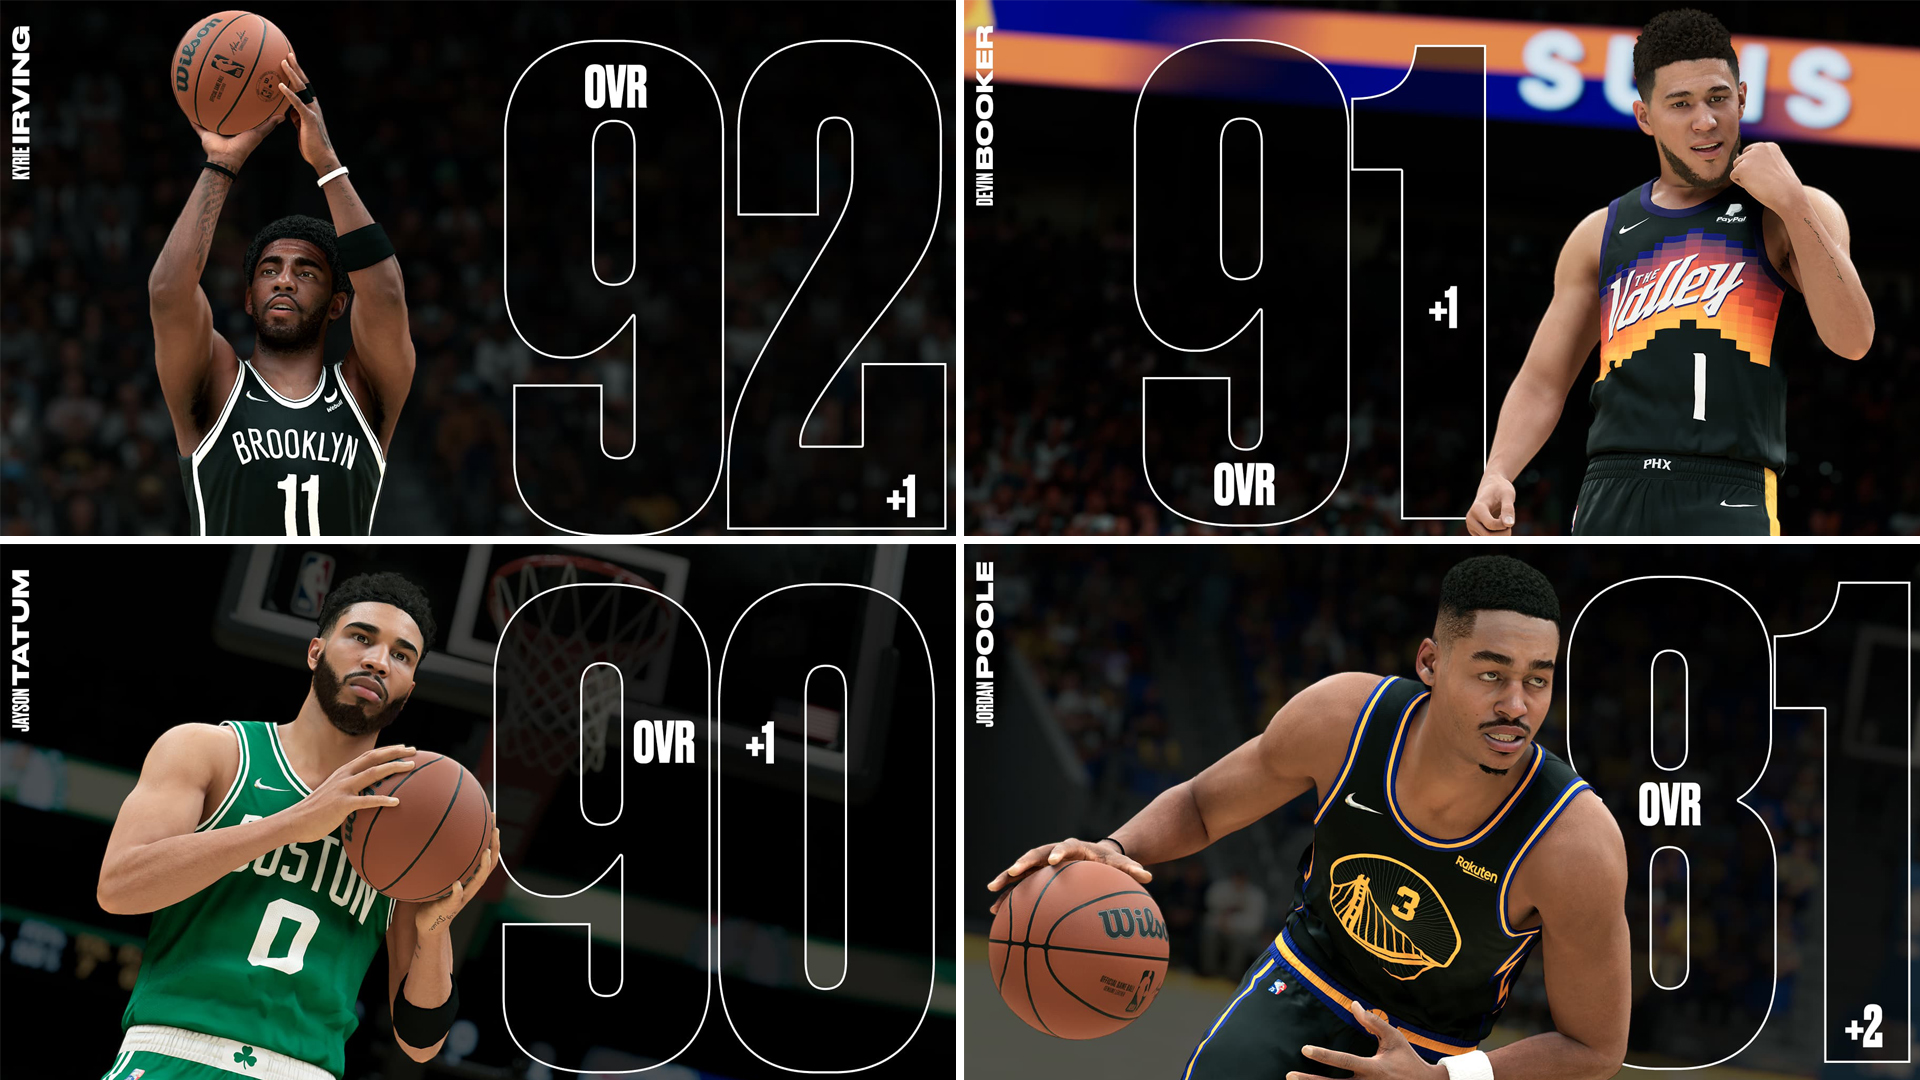 NBA 2K23 Roster Update Available - Full Details Here (4-11)